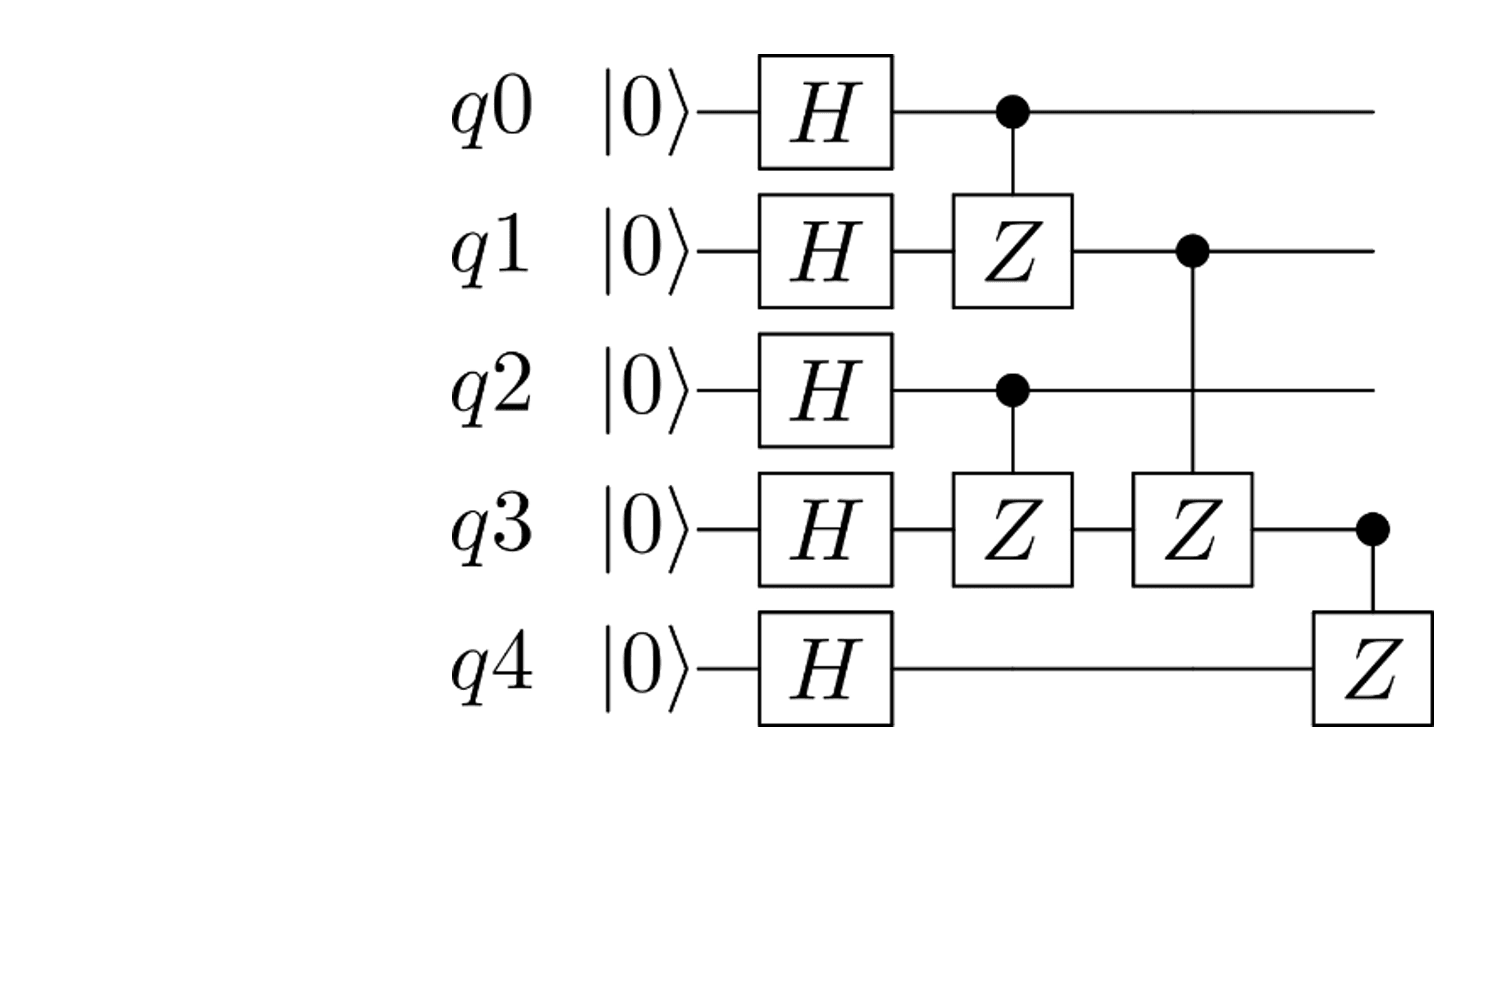 A circuit for preparing a graph state over the unit-cell with a controlled-phase gate depth of three.